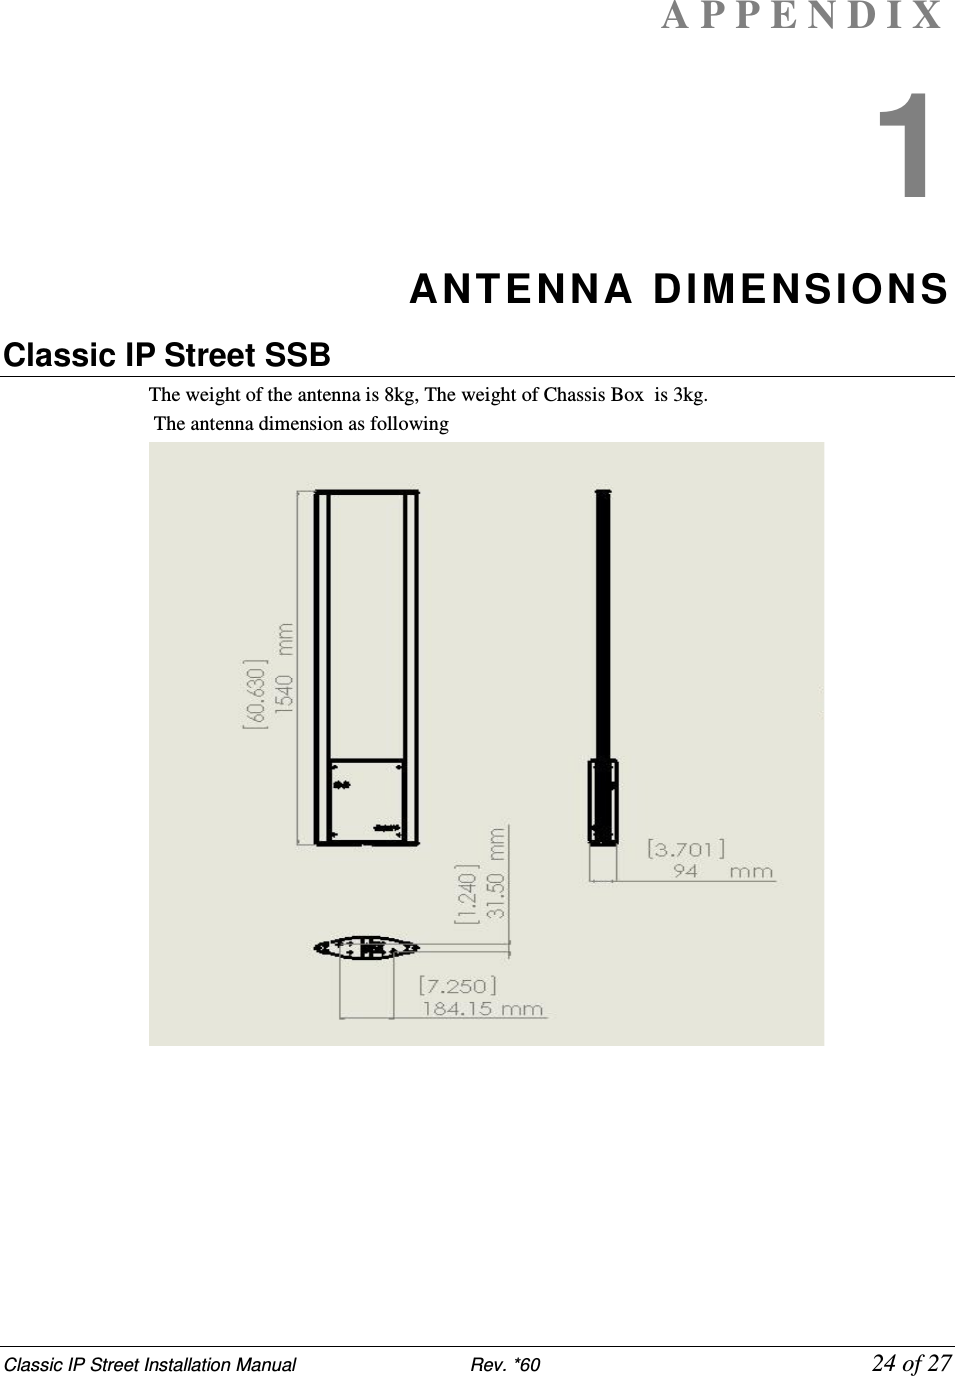 Classic IP Street Installation Manual                           Rev. *60             24 of 27 A P P E N D I X  1 ANTENNA  DIMENSION S Classic IP Street SSB The weight of the antenna is 8kg, The weight of Chassis Box  is 3kg.  The antenna dimension as following  